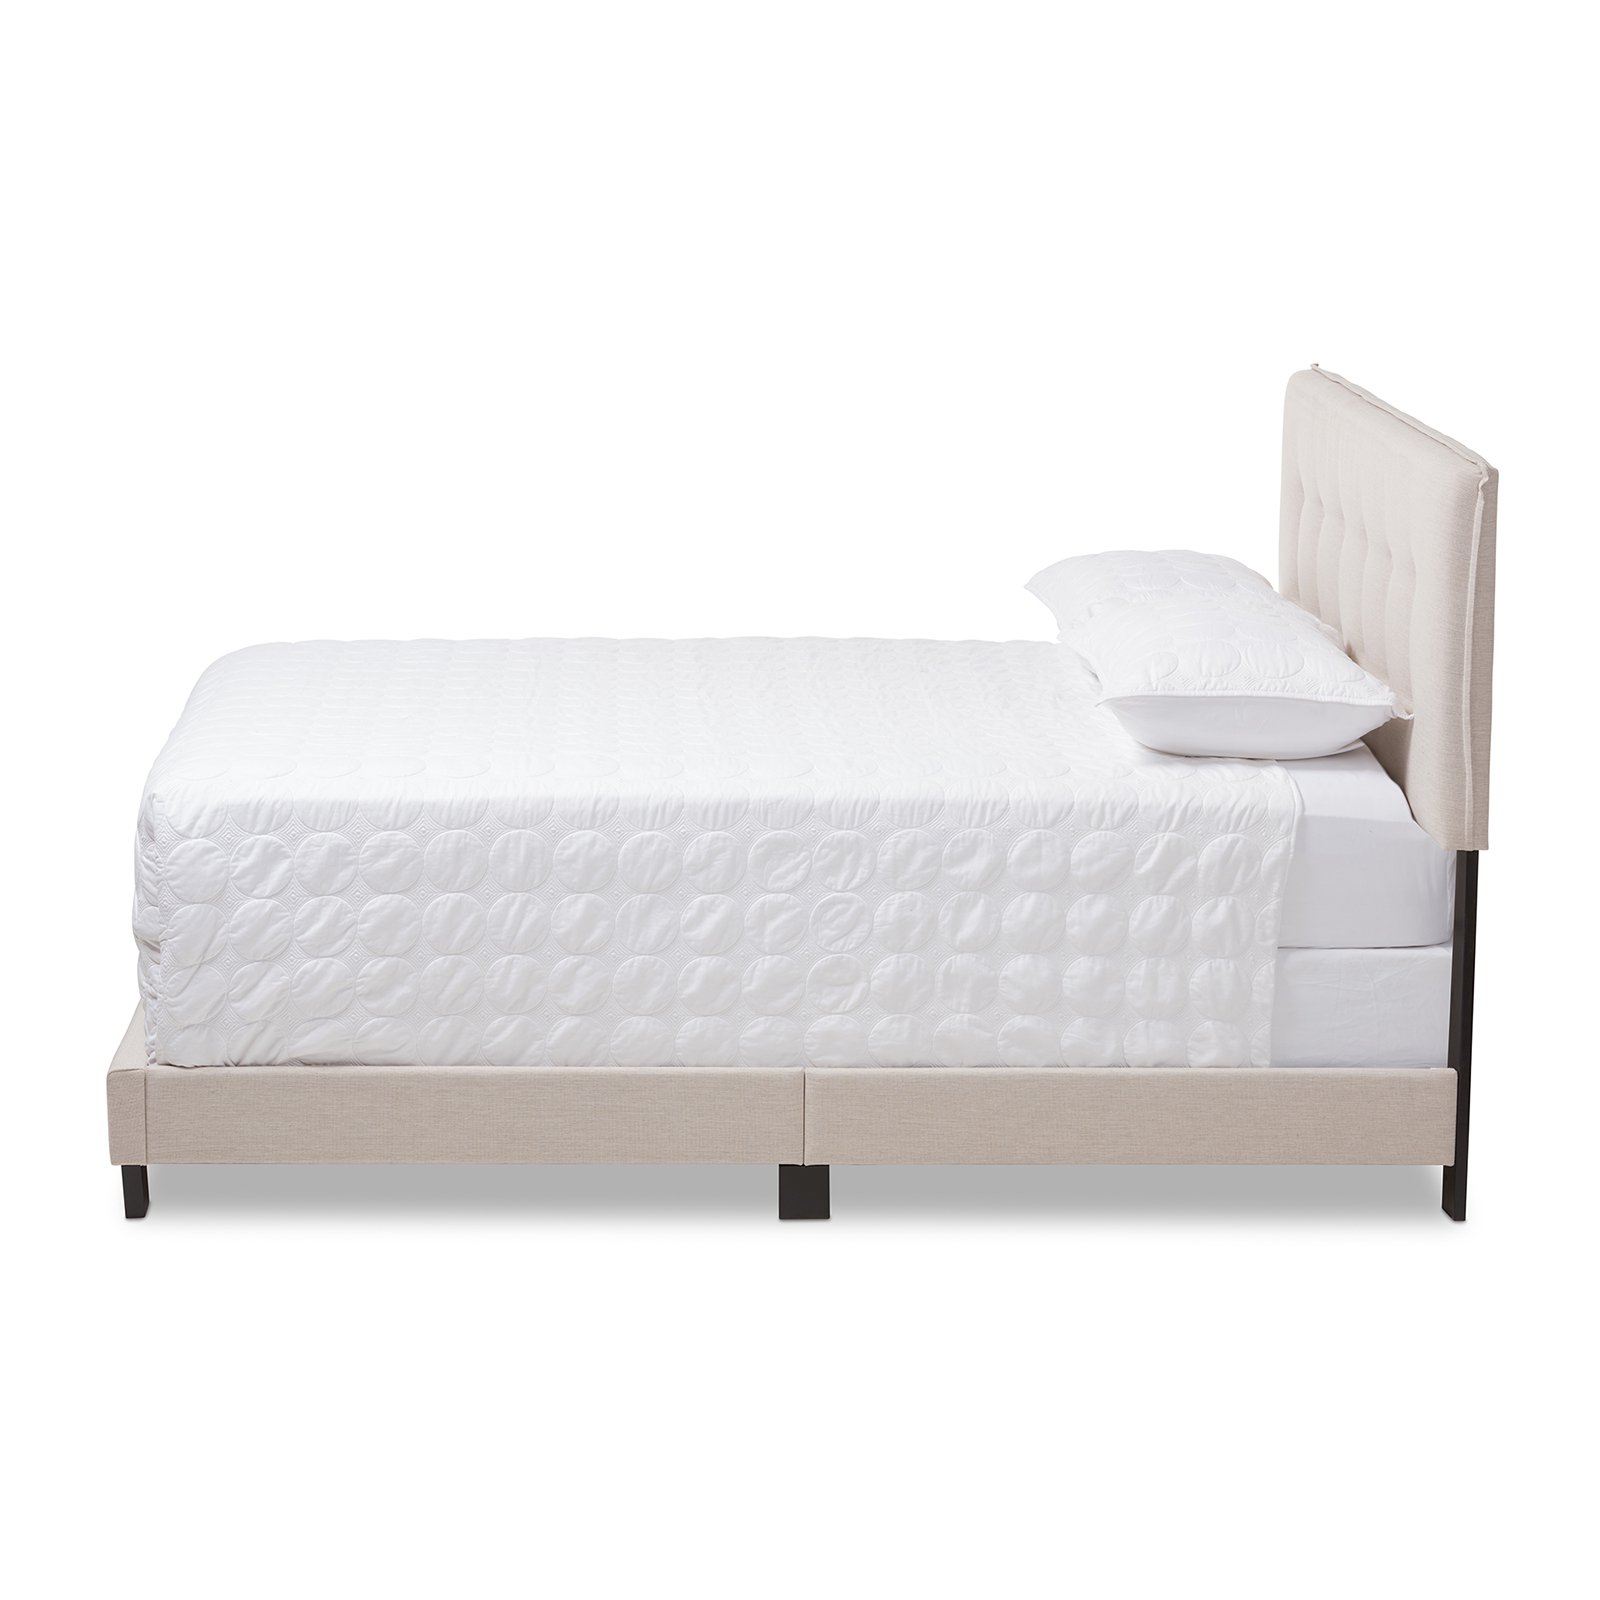 Baxton Studio Audrey Modern and Contemporary Upholstered Bed, Multiple Sizes, Multiple Colors - image 3 of 10